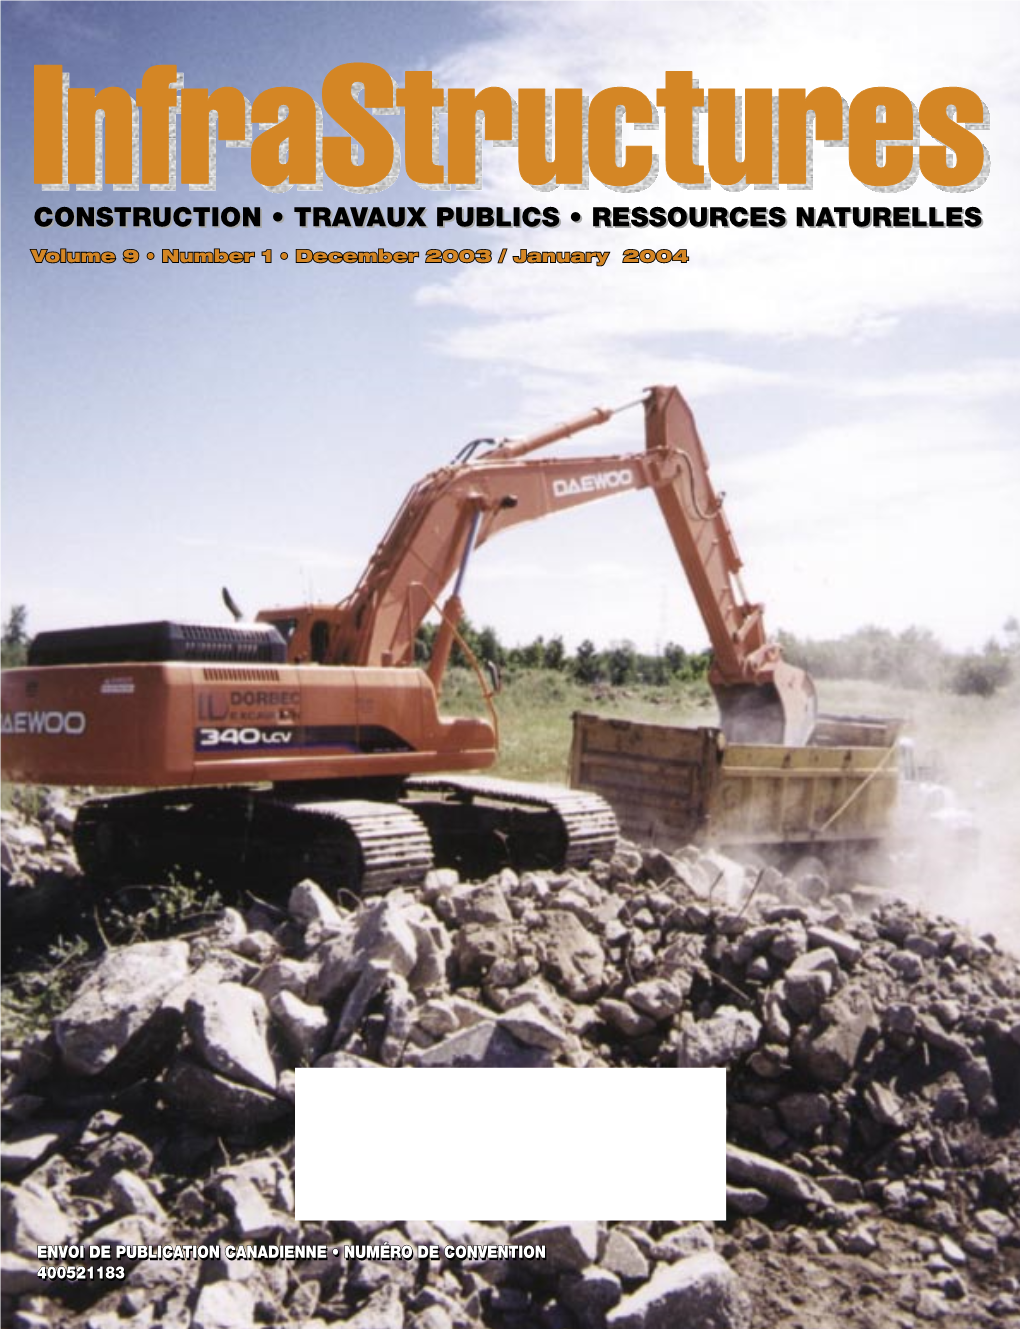 CONSTRUCTION • TRAVAUX PUBLICS • RESSOURCES NATURELLES Volume 9 Number 1 December 2003/January 2004 2004 Begins with a Big Issue